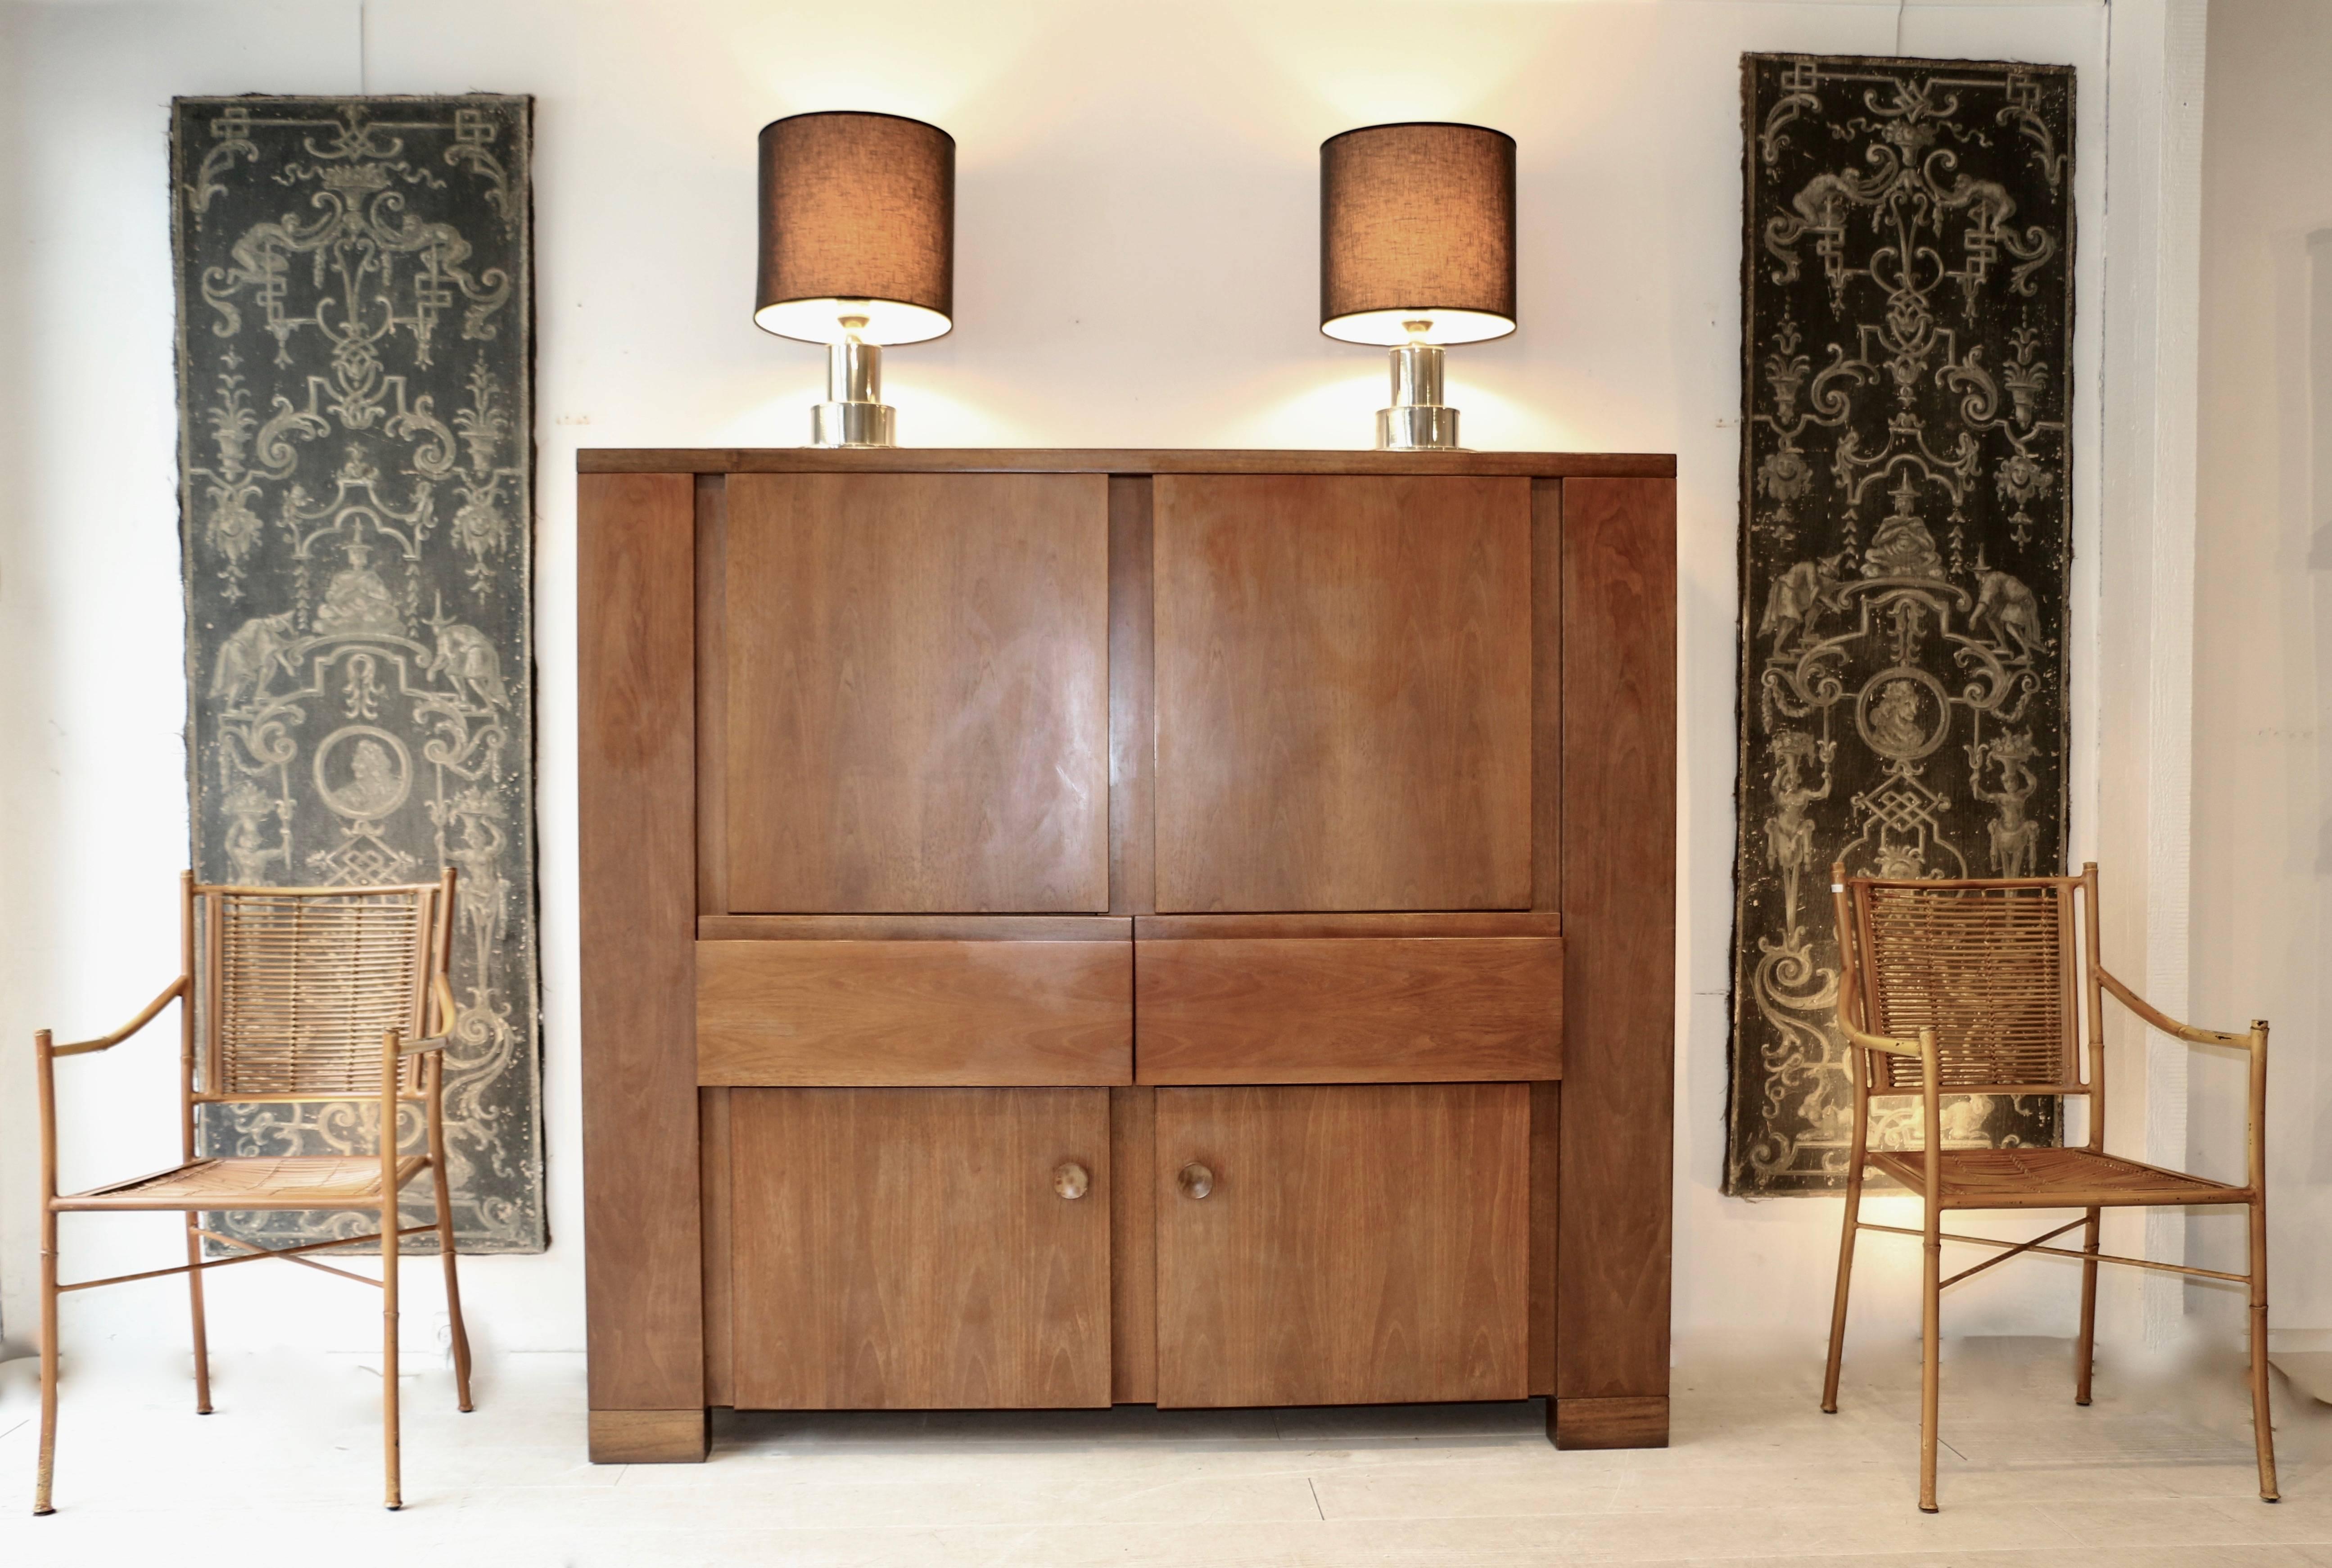 Giovanni Michelucci. 1964. Large storage unit in solid walnut from the Torbecchia series. The cabinet is composed of four doors and two drawers.